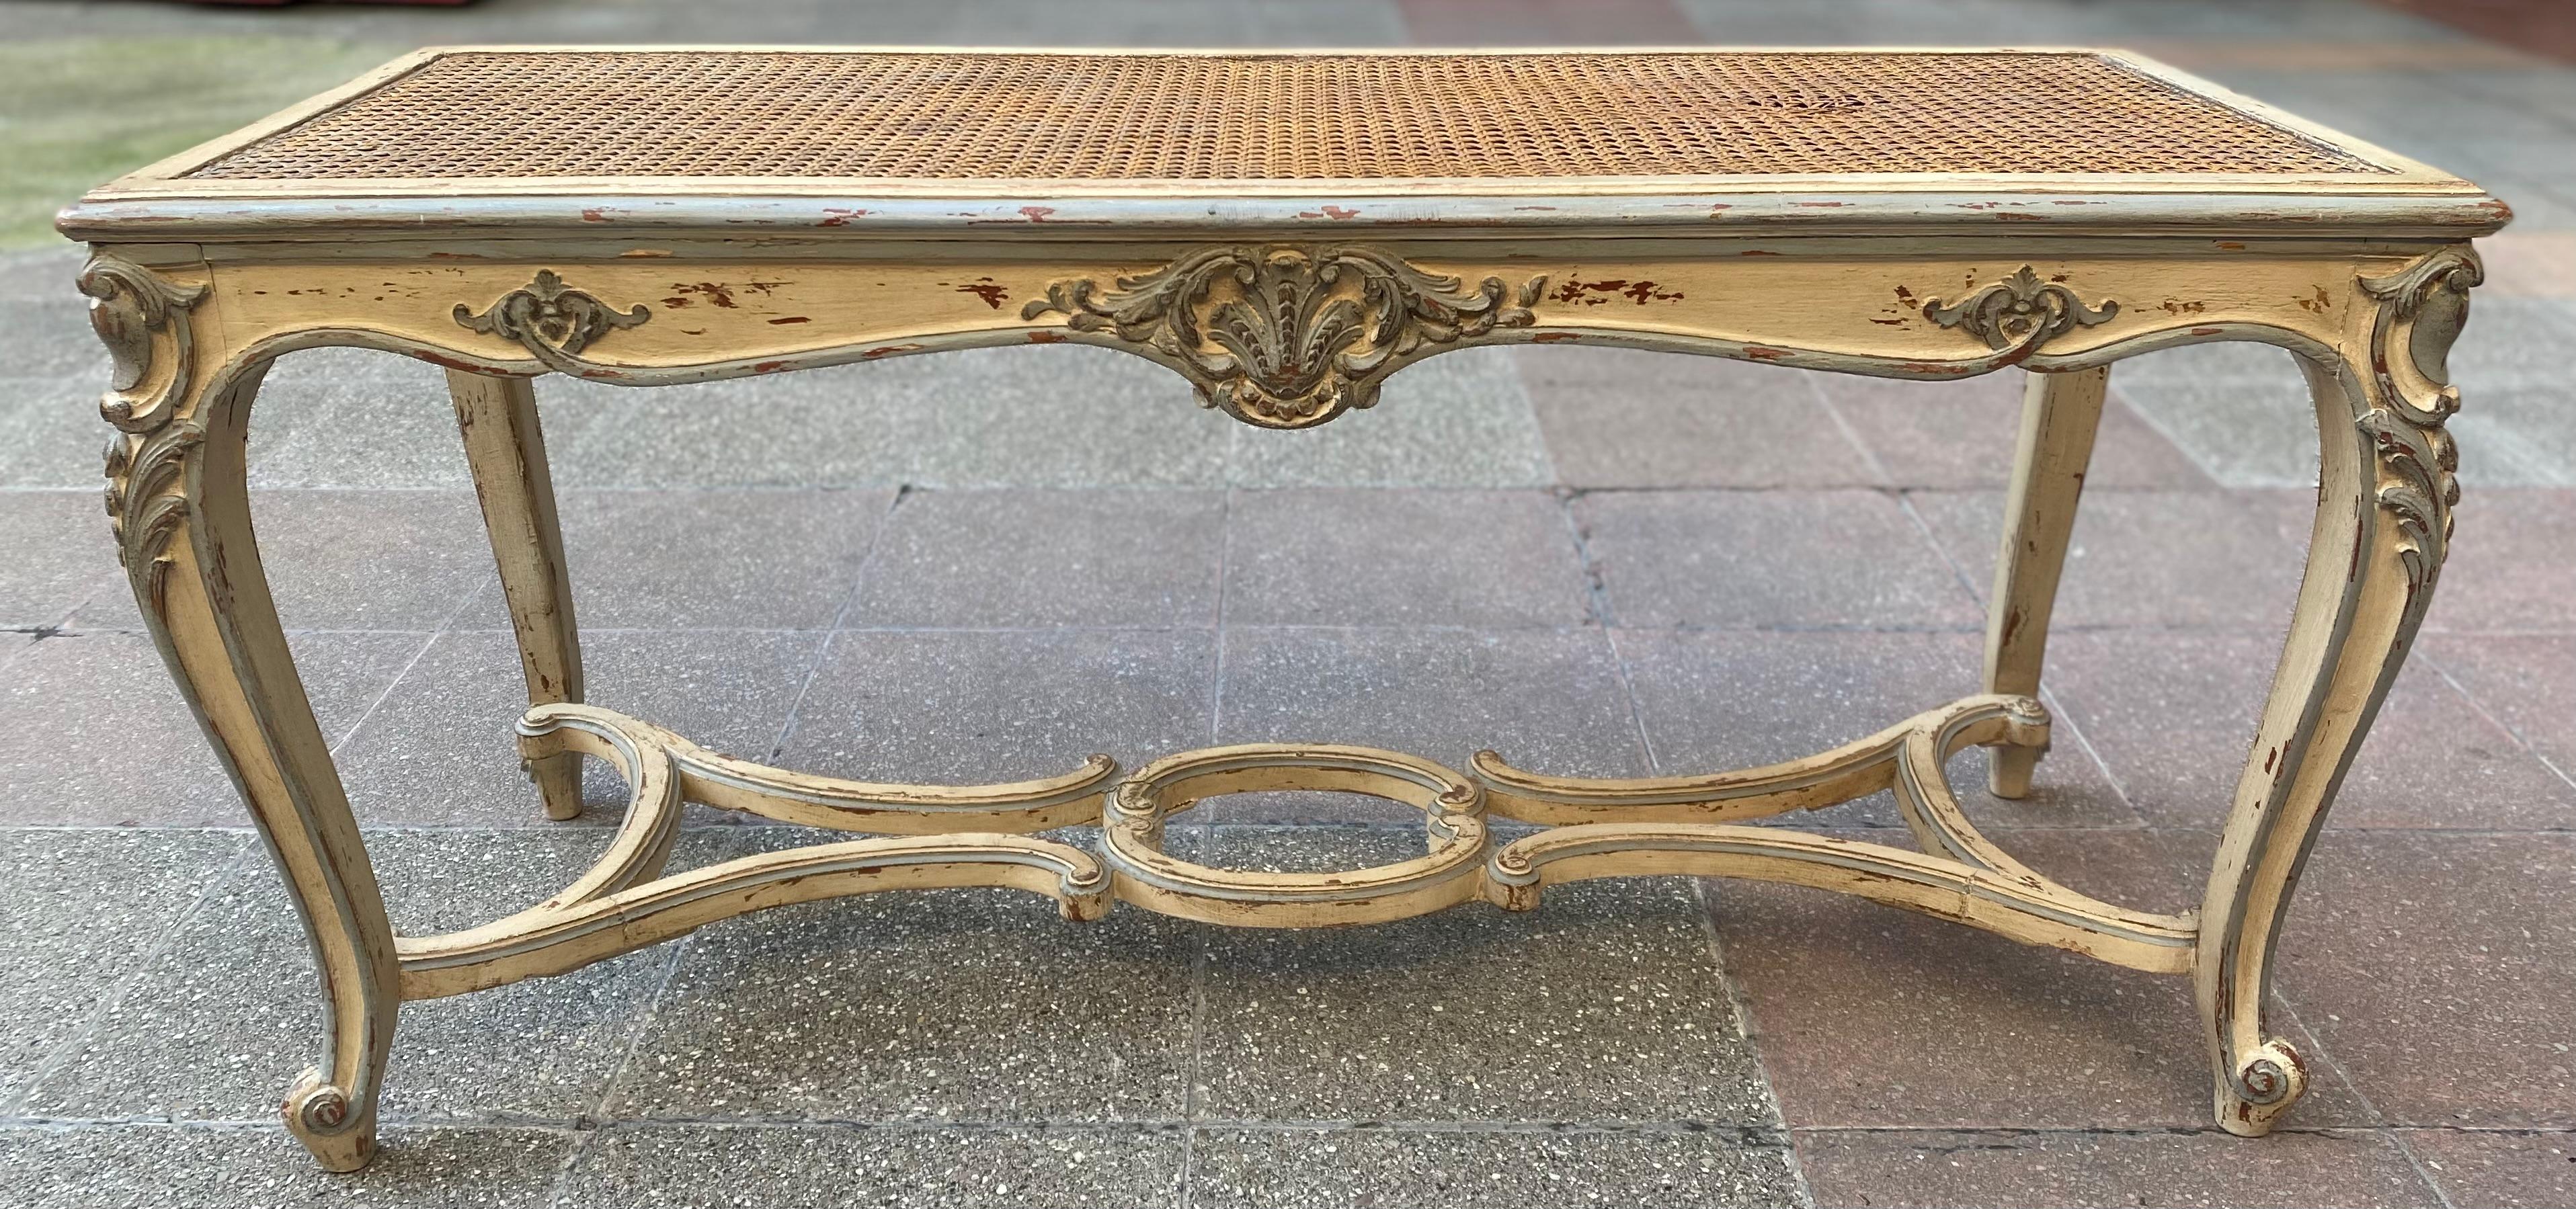 Bench in cane and lacquered wood.
Circa: beginning of the XXth century. 
Dimensions: H 49 x L 100x L 40 cm.
Ref: 1010.
Price: 700€ for the bench.